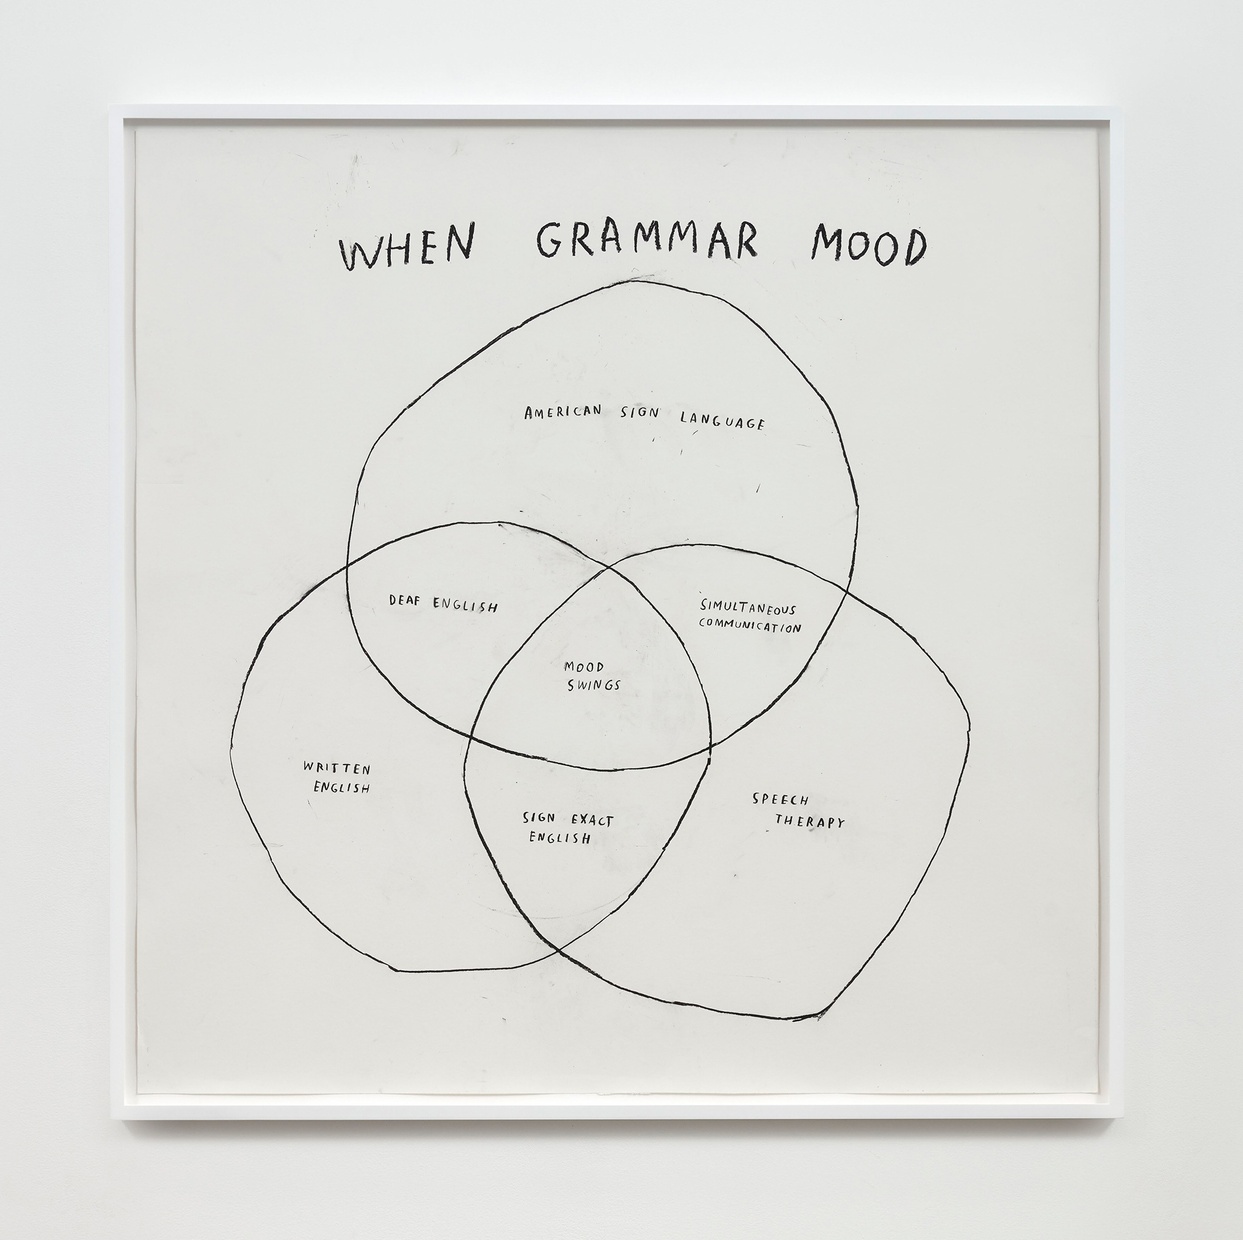 Drawing like a Venn diagram with three circles that partially overlap each other above which the words “When Grammar Mood” are written in all caps. Each section of the diagram is also labeled.